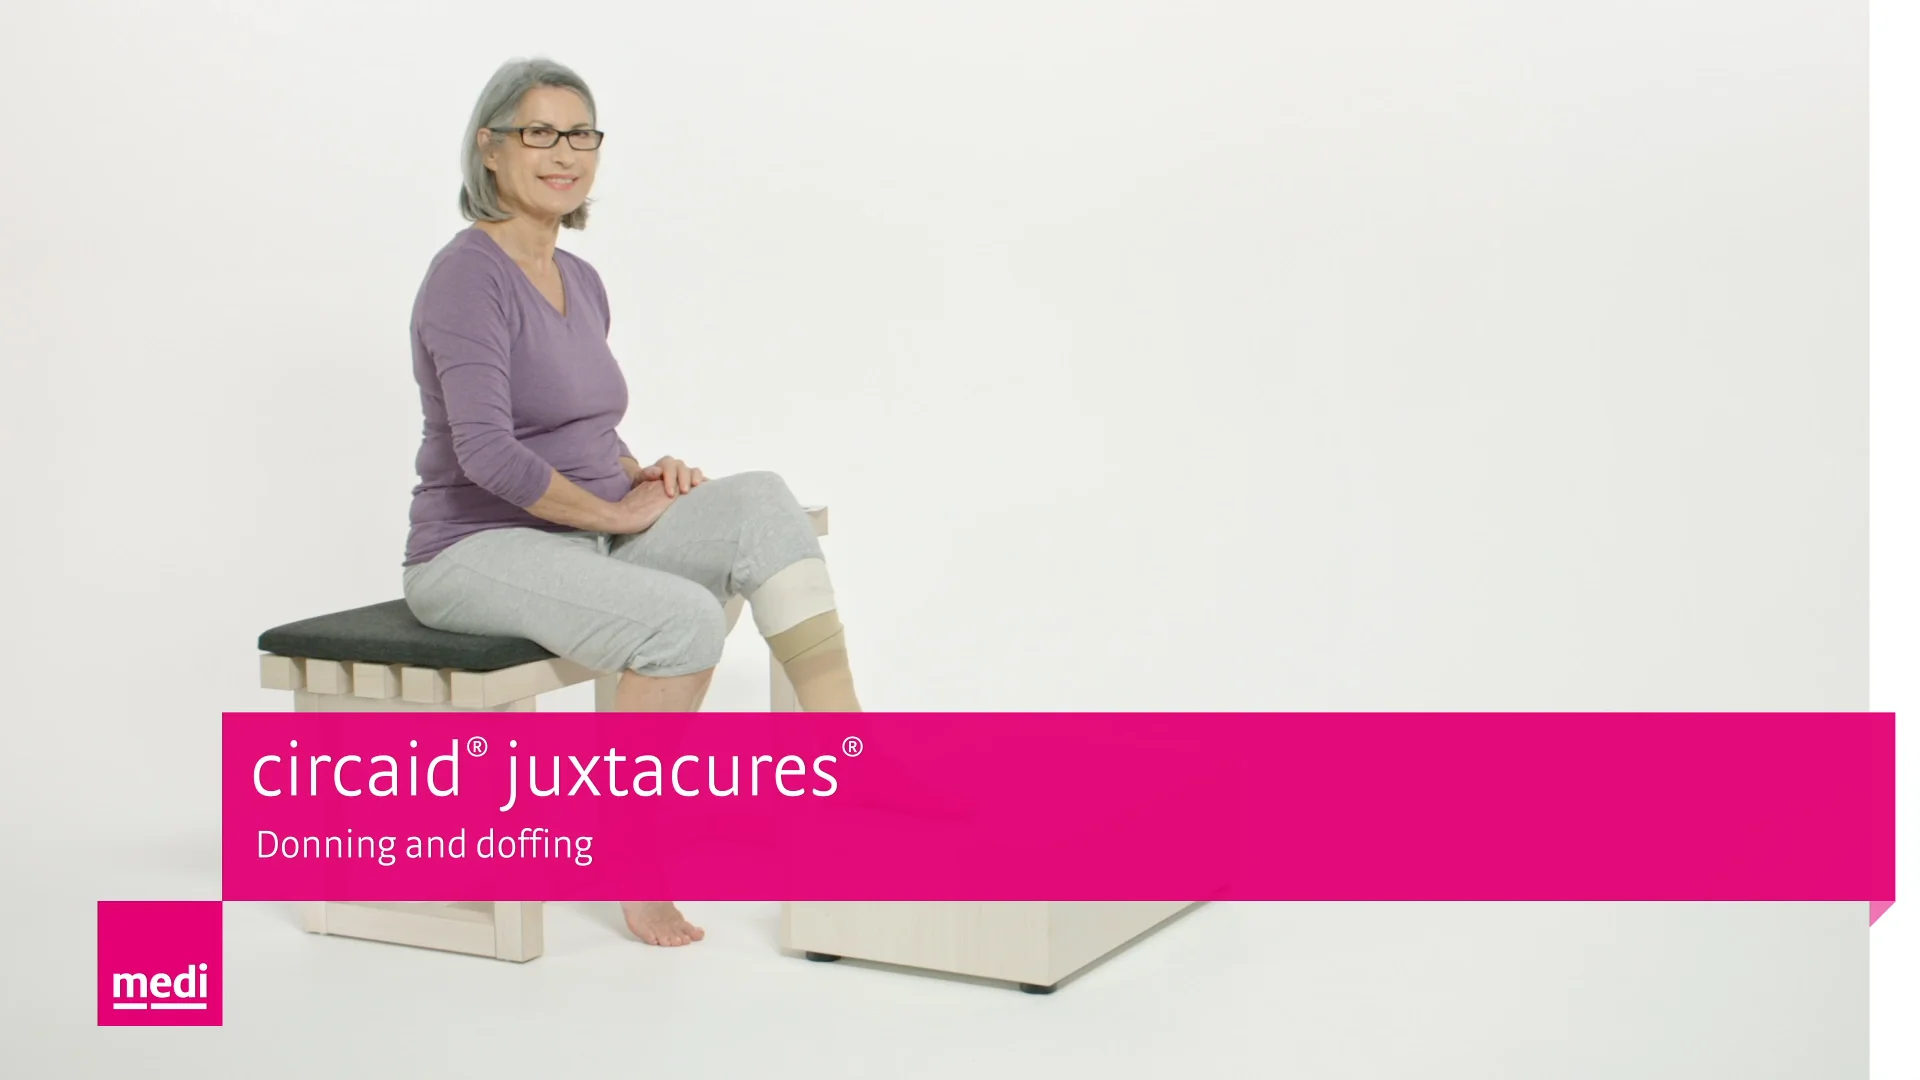 circaid® juxtacures® – Donning and doffing on Vimeo